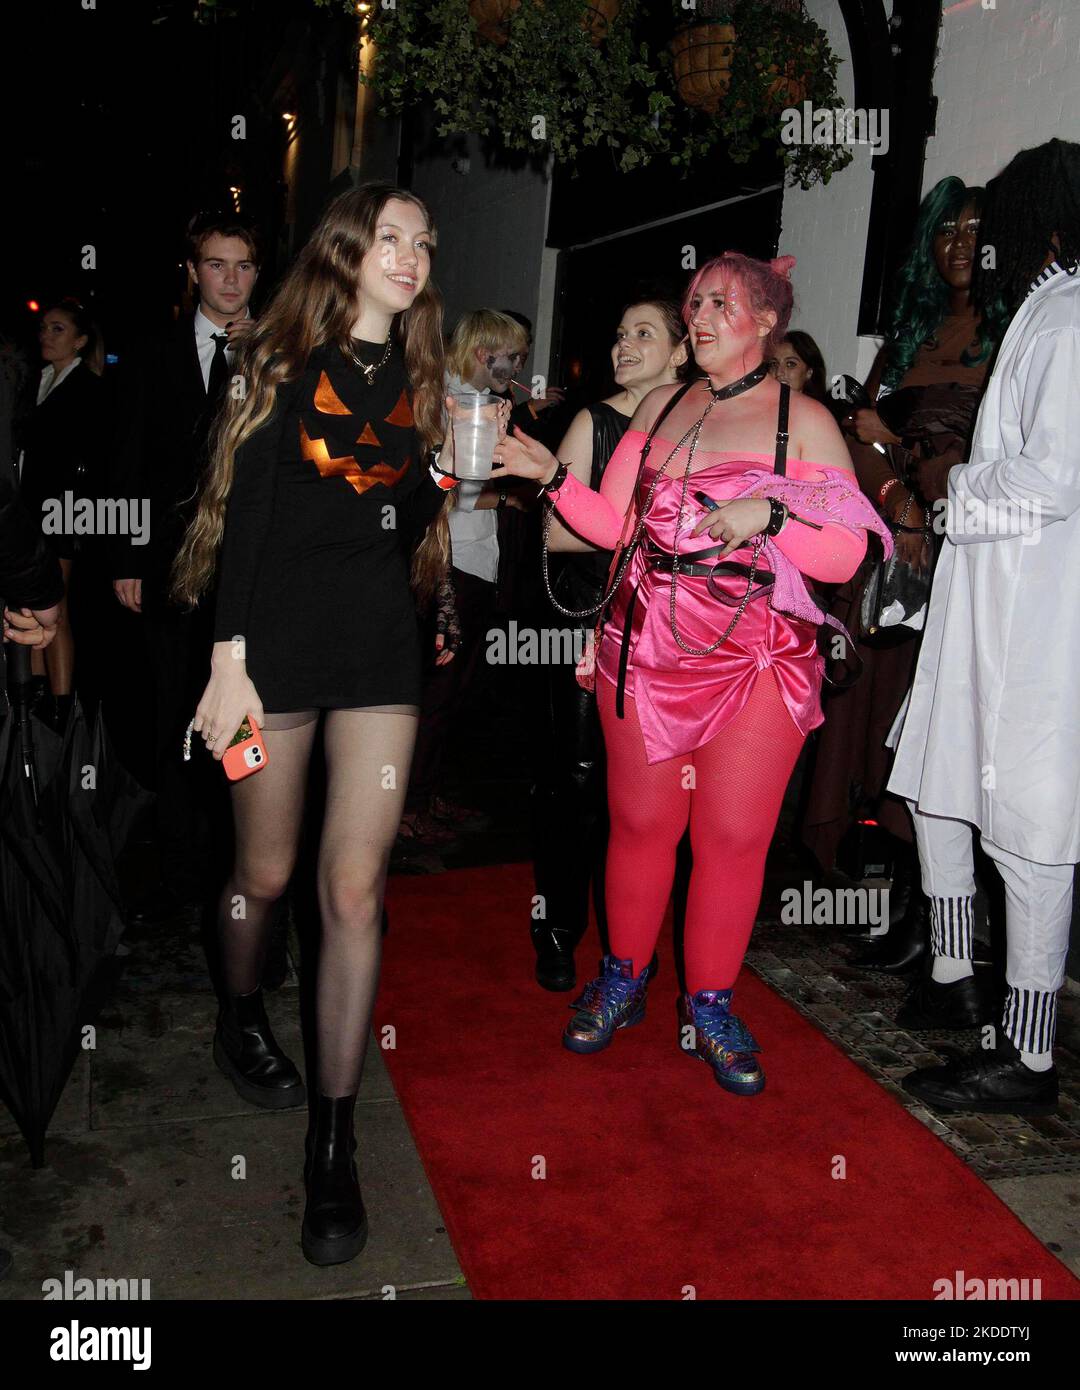 Jonathan ross’s daughter honey king was at the halloween party at kook ...